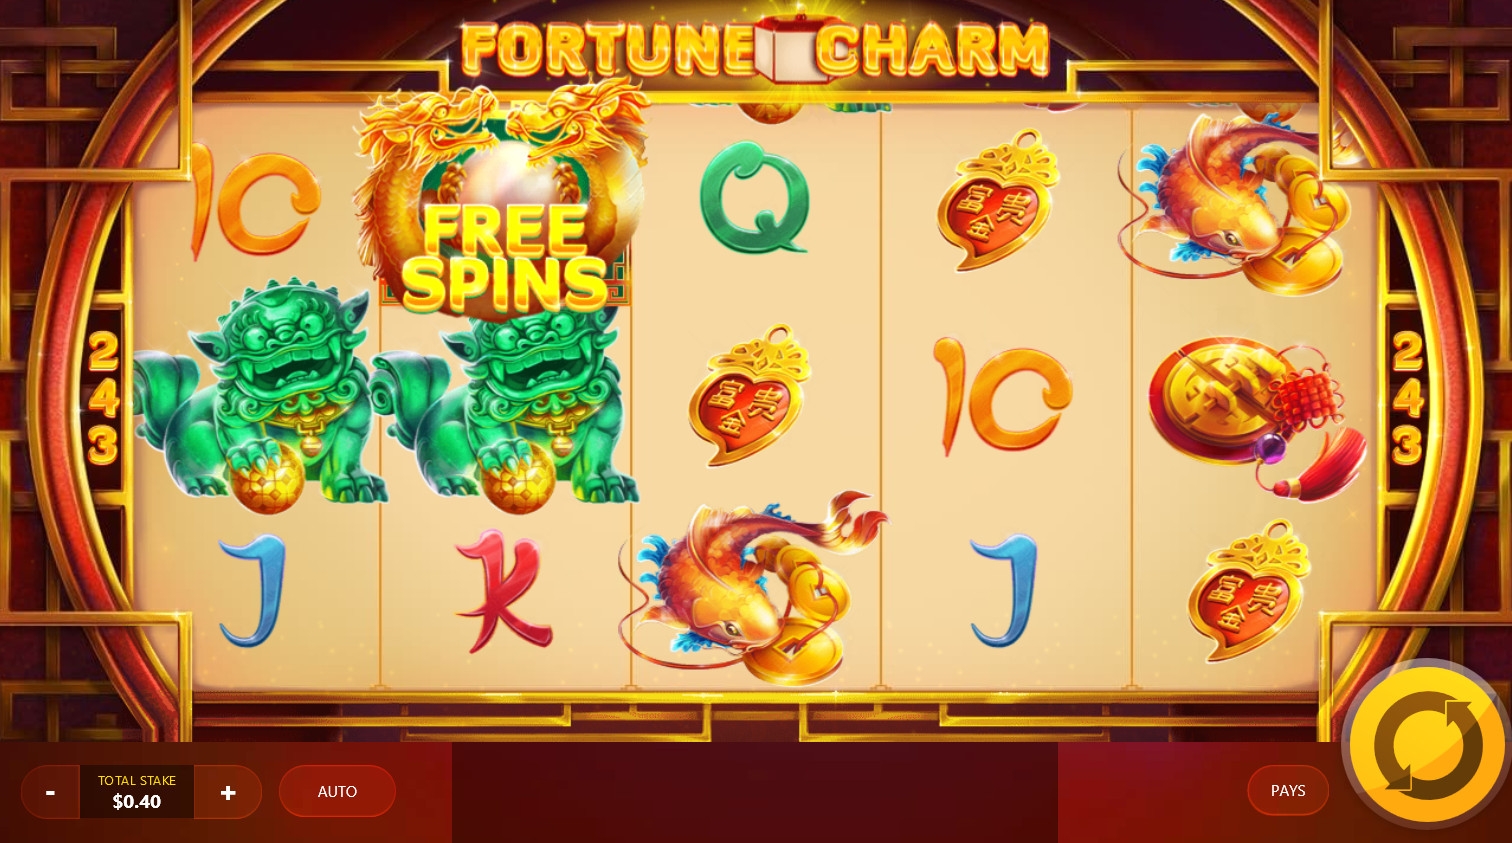 Fortune Charm (Fortune Charm) from category Slots